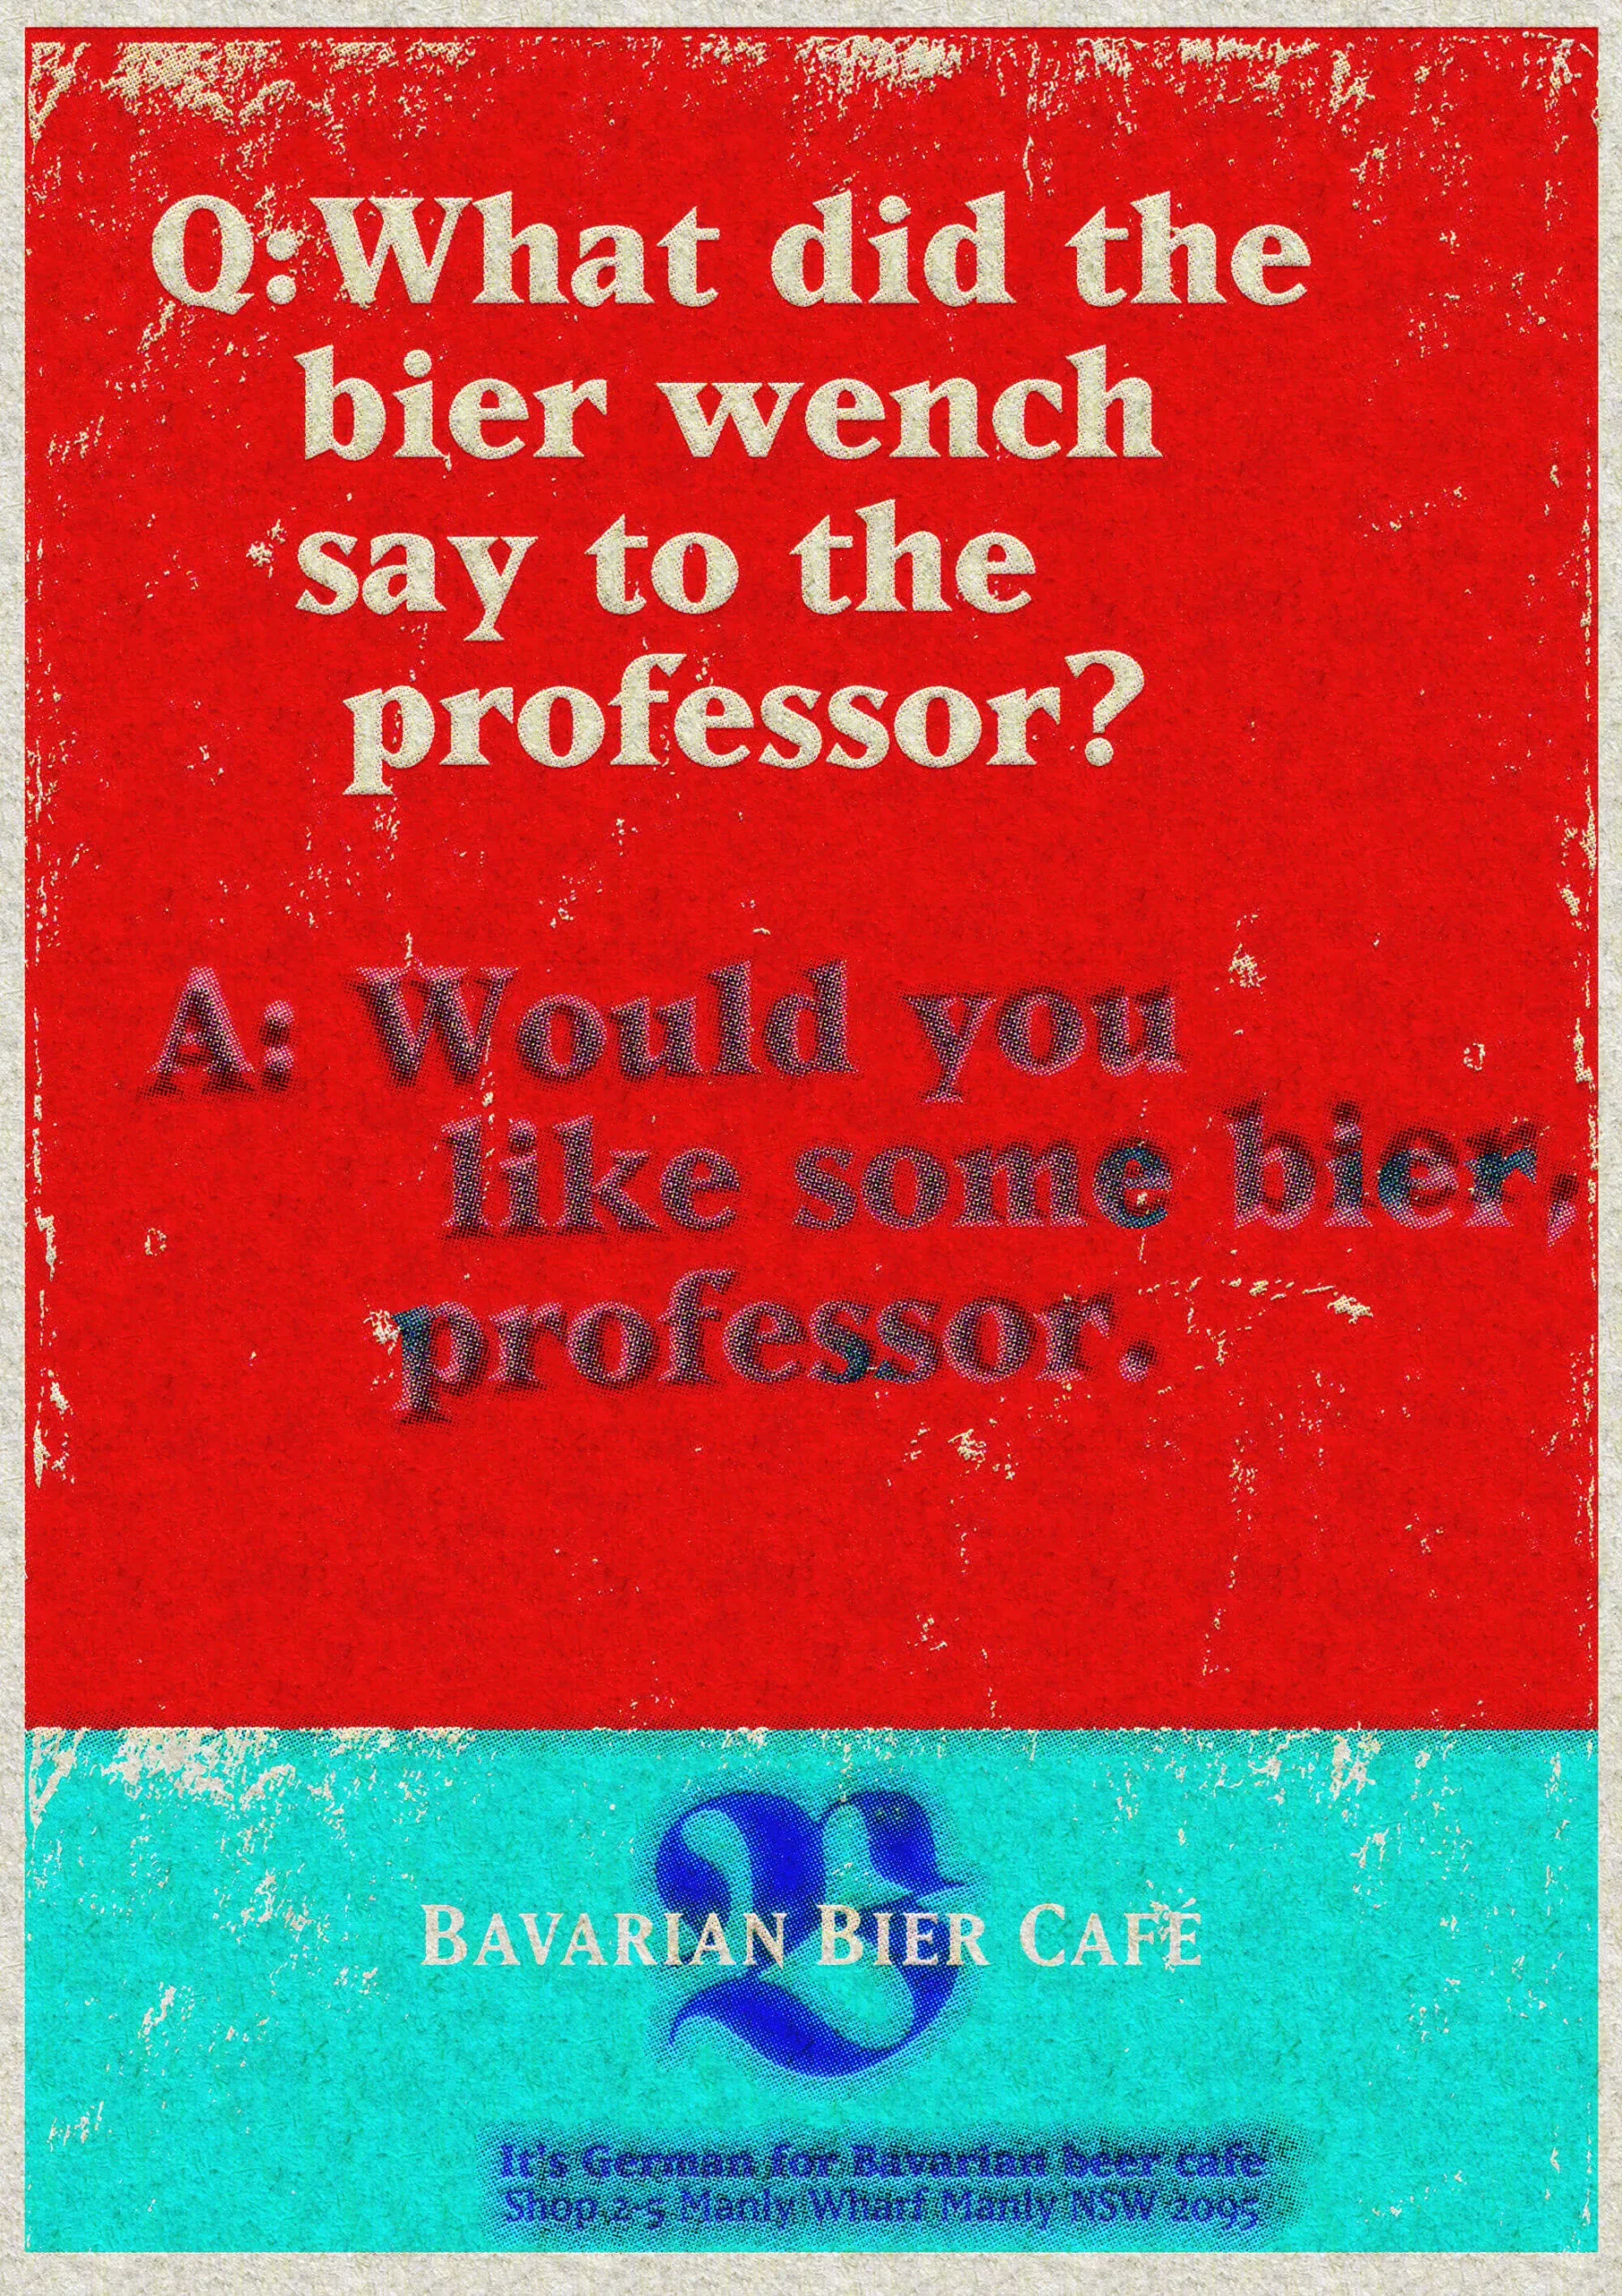 An advert for a Bavarian Bier Café that says "Q: What did the beir wench say to the professor? A: Would you like some bier, professor?"